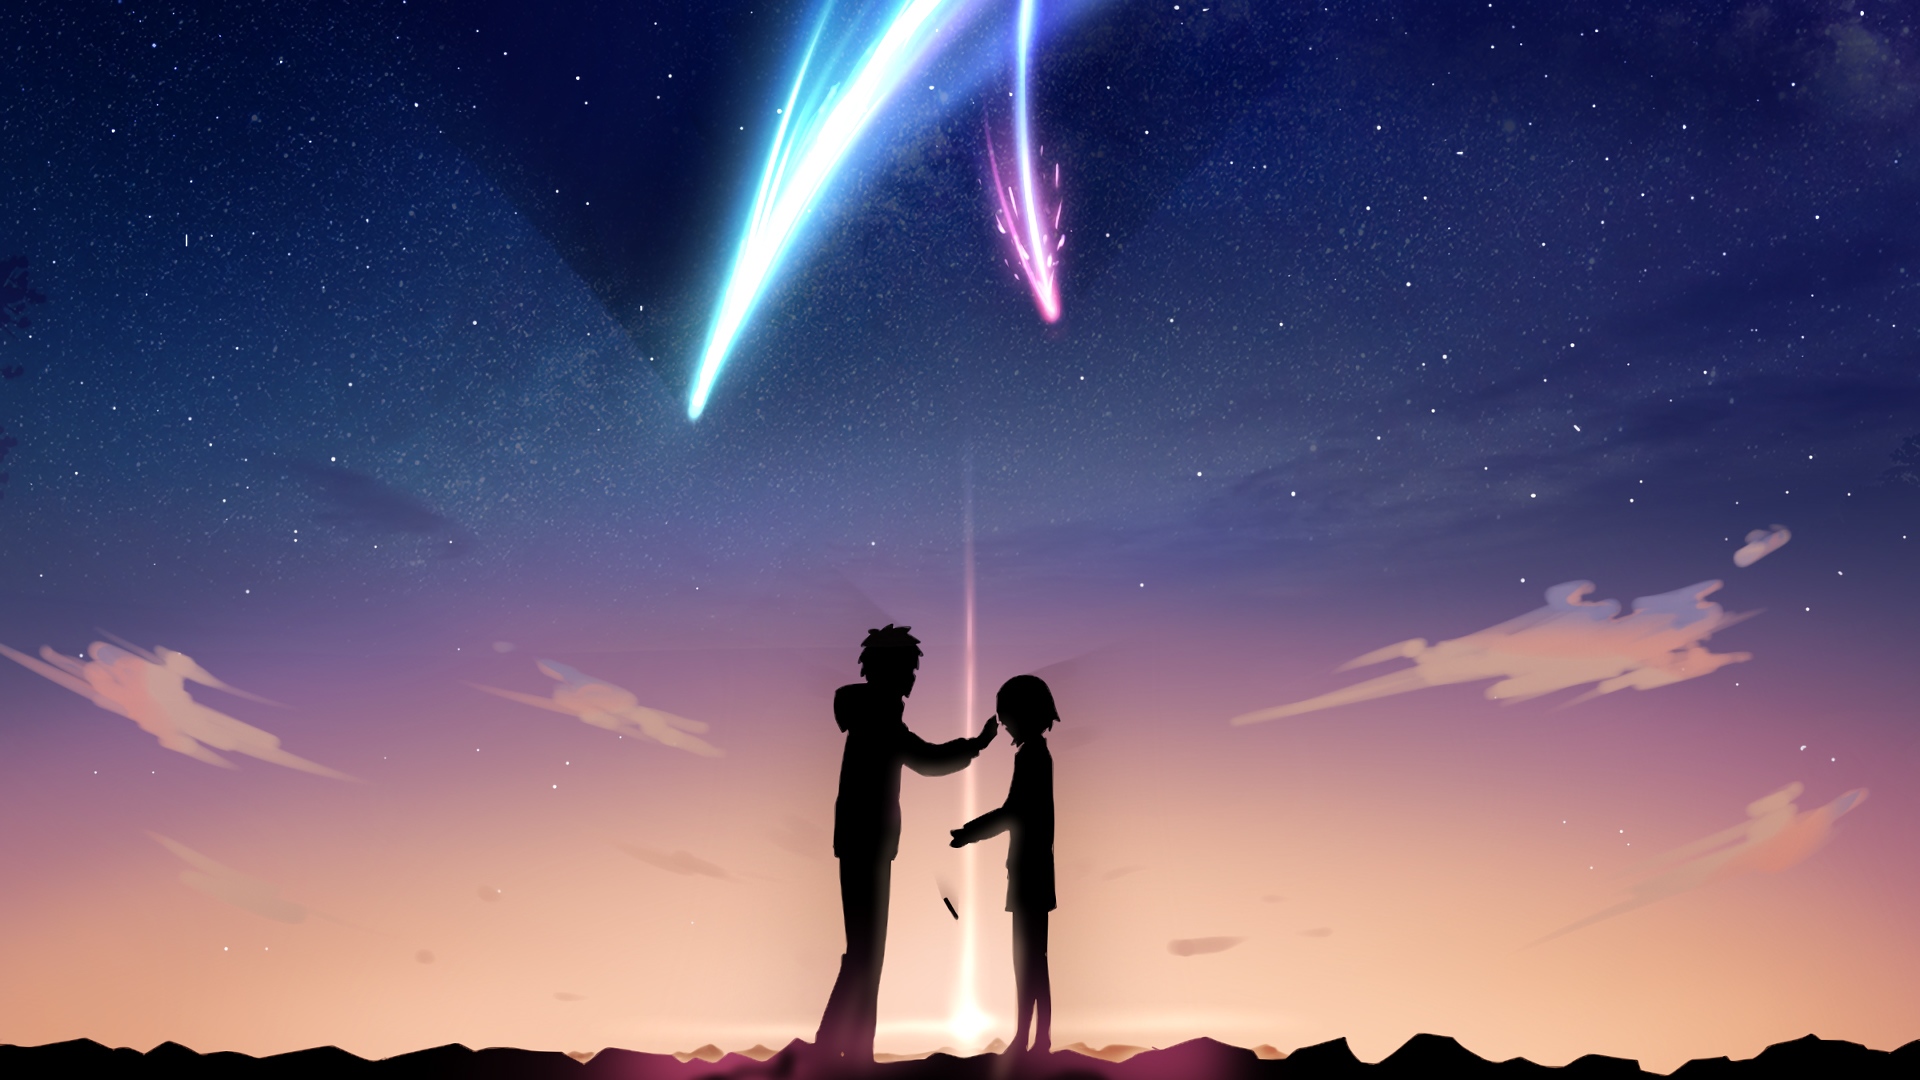 your name anime wallpaper,sky,people in nature,atmosphere,love,cloud